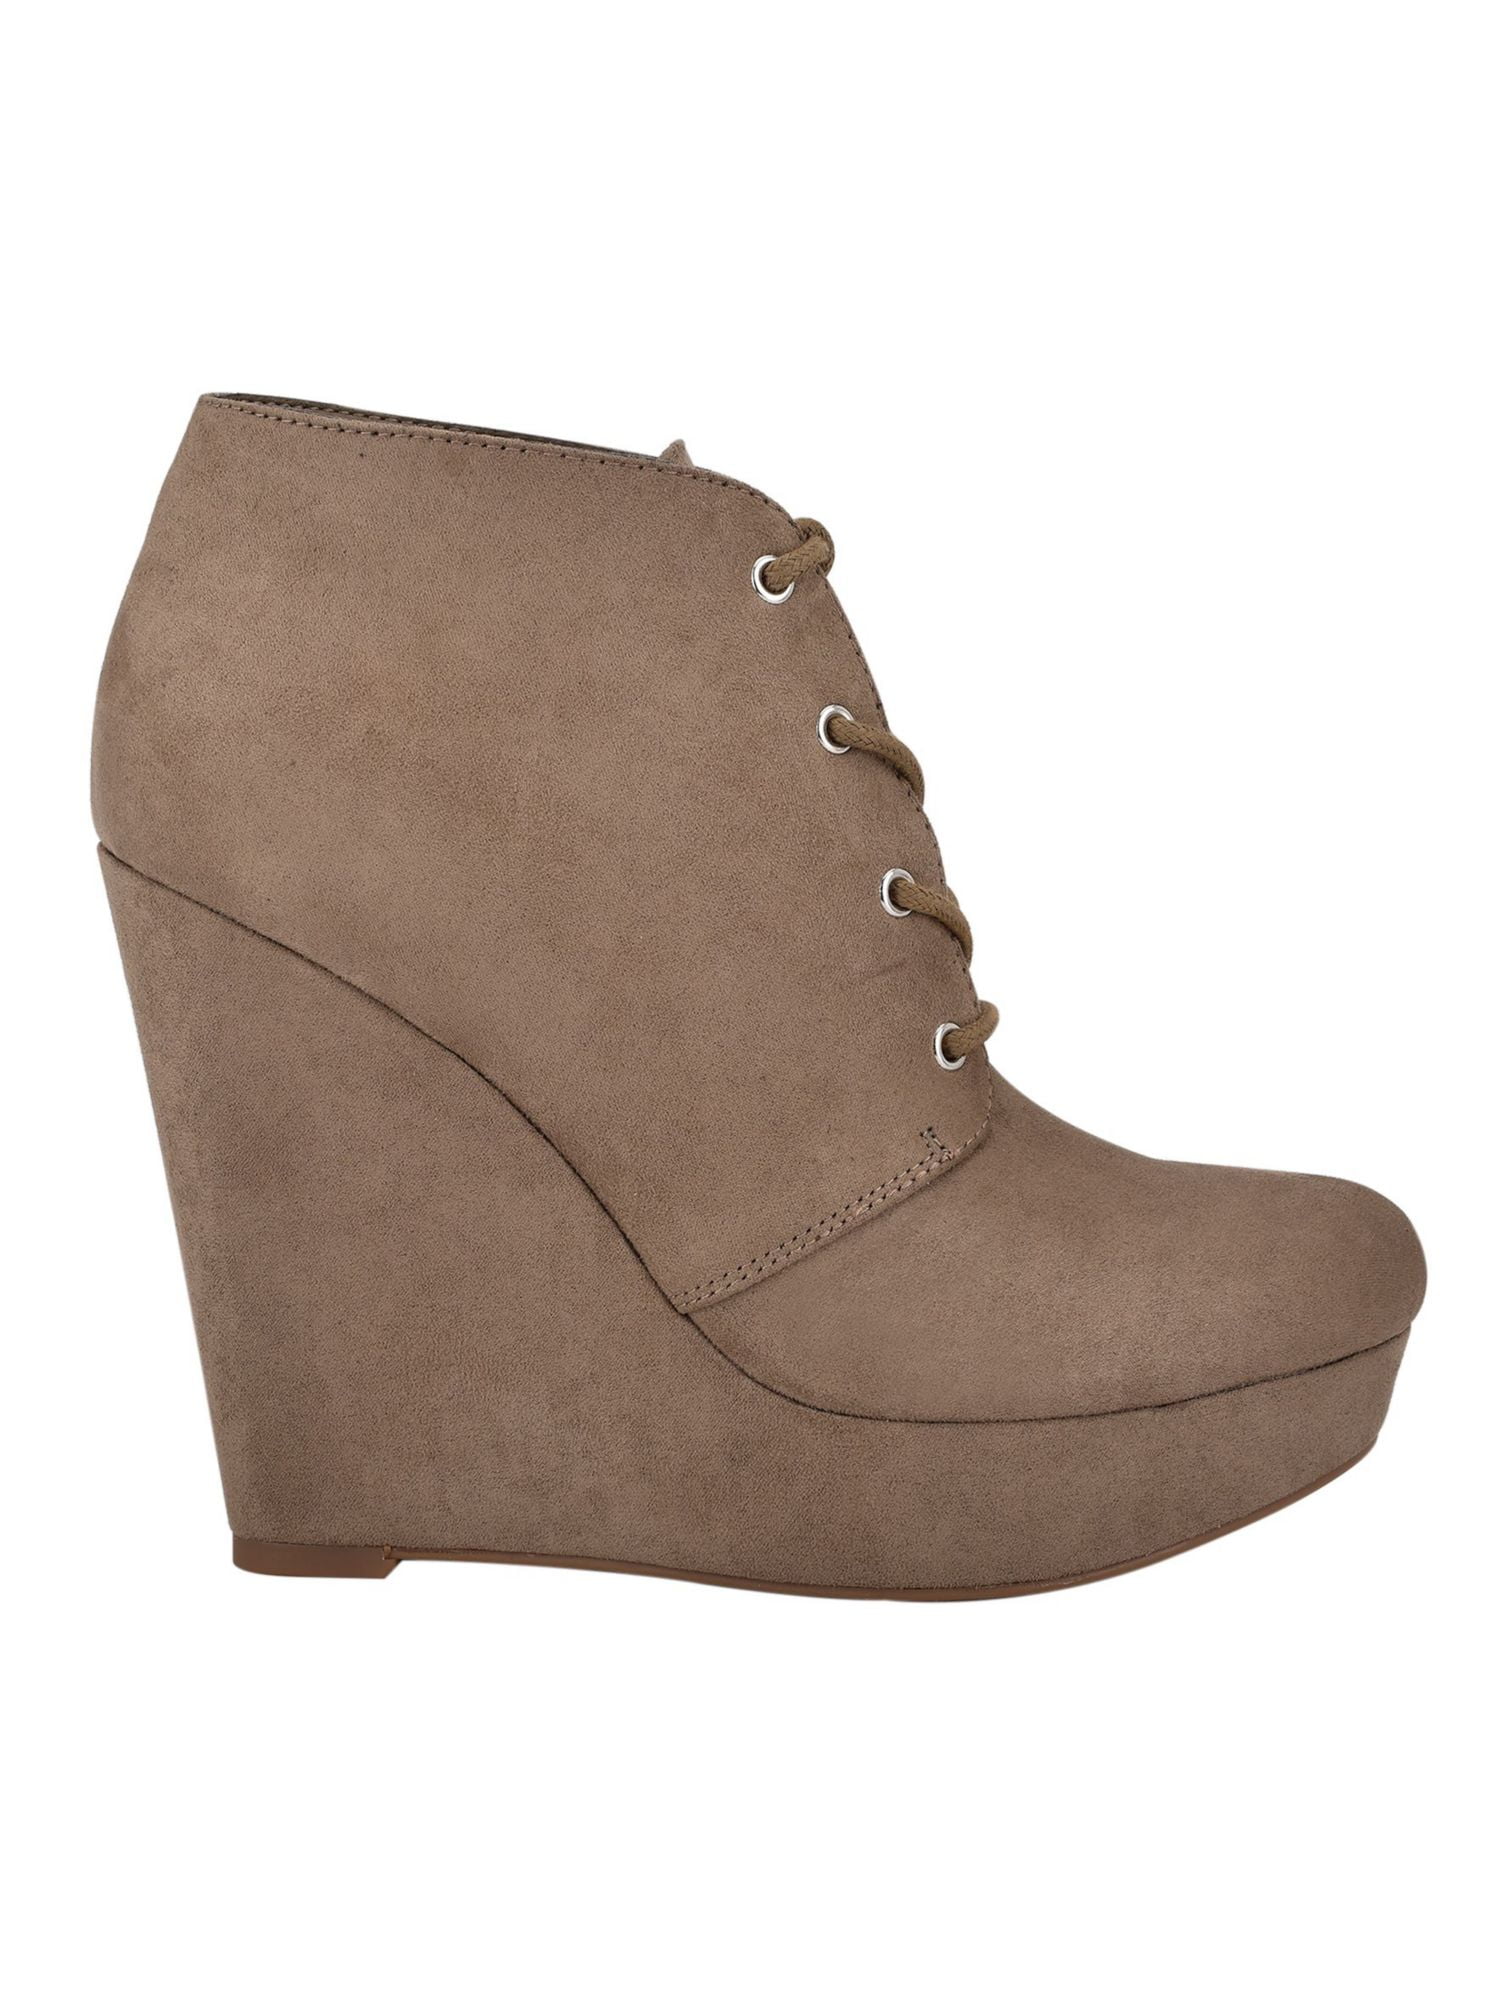 GBG LOS ANGELES Womens Taupe Beige 1